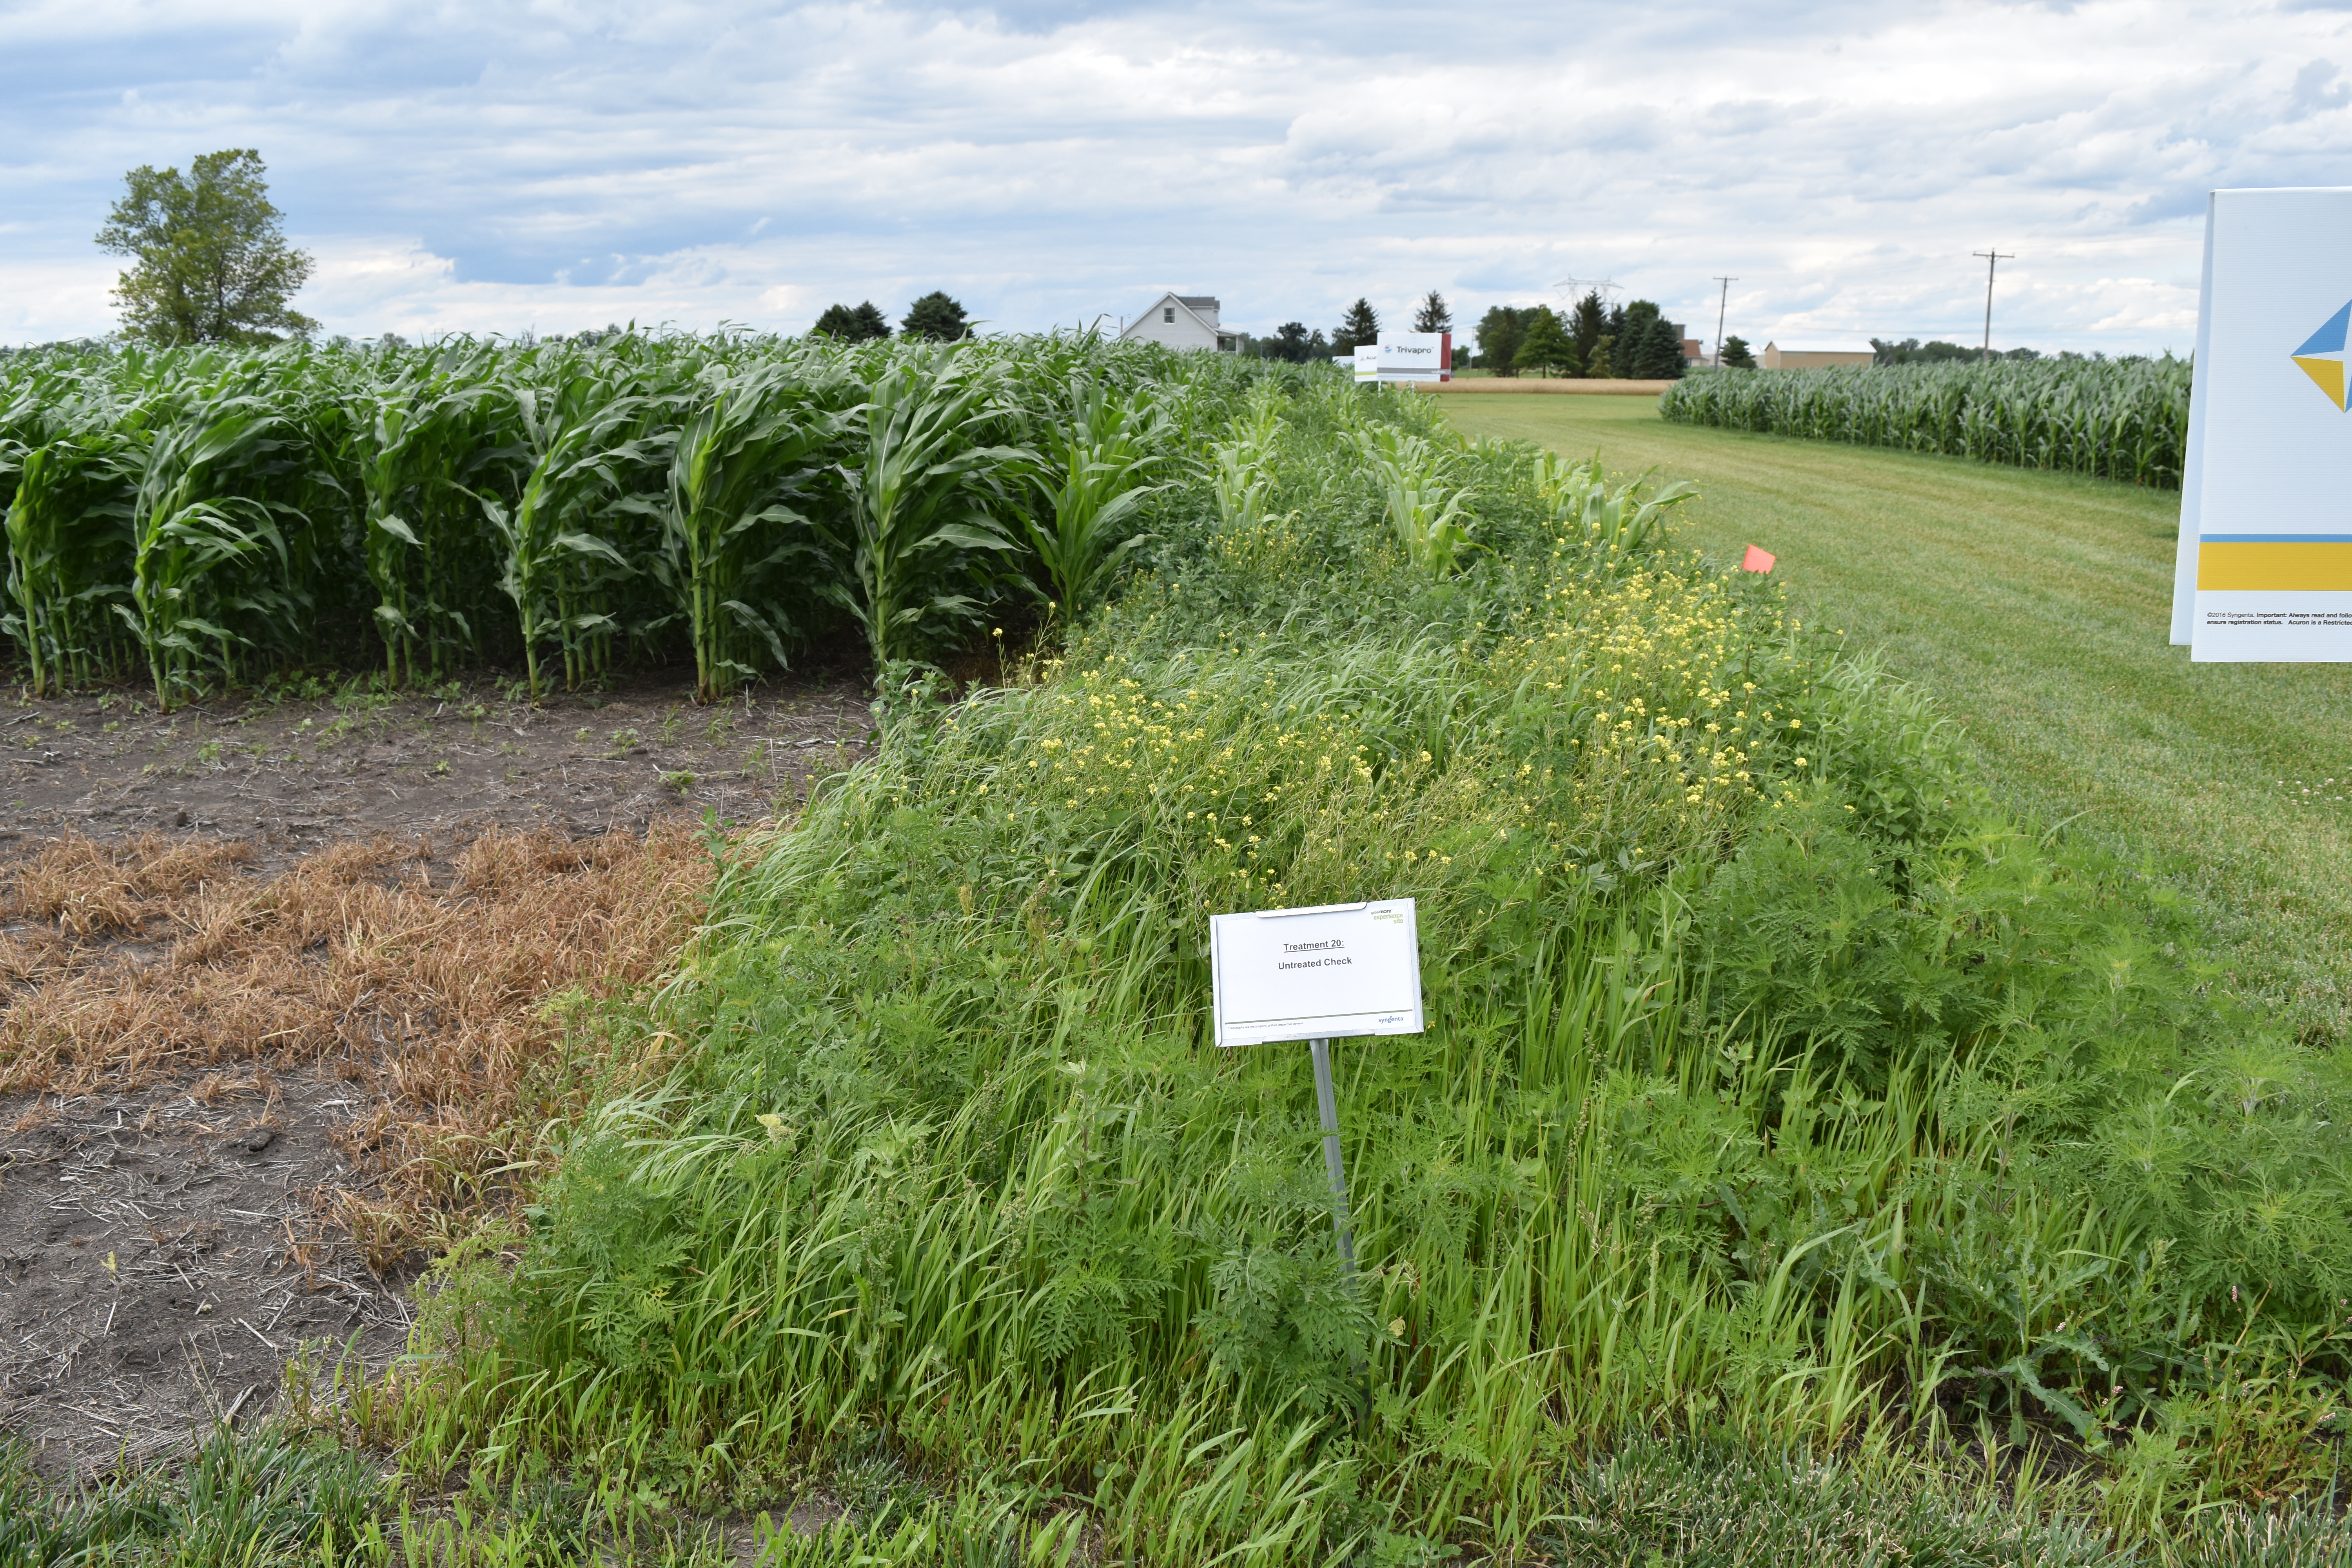 This agronomic image compares treated corn with untreated corn.